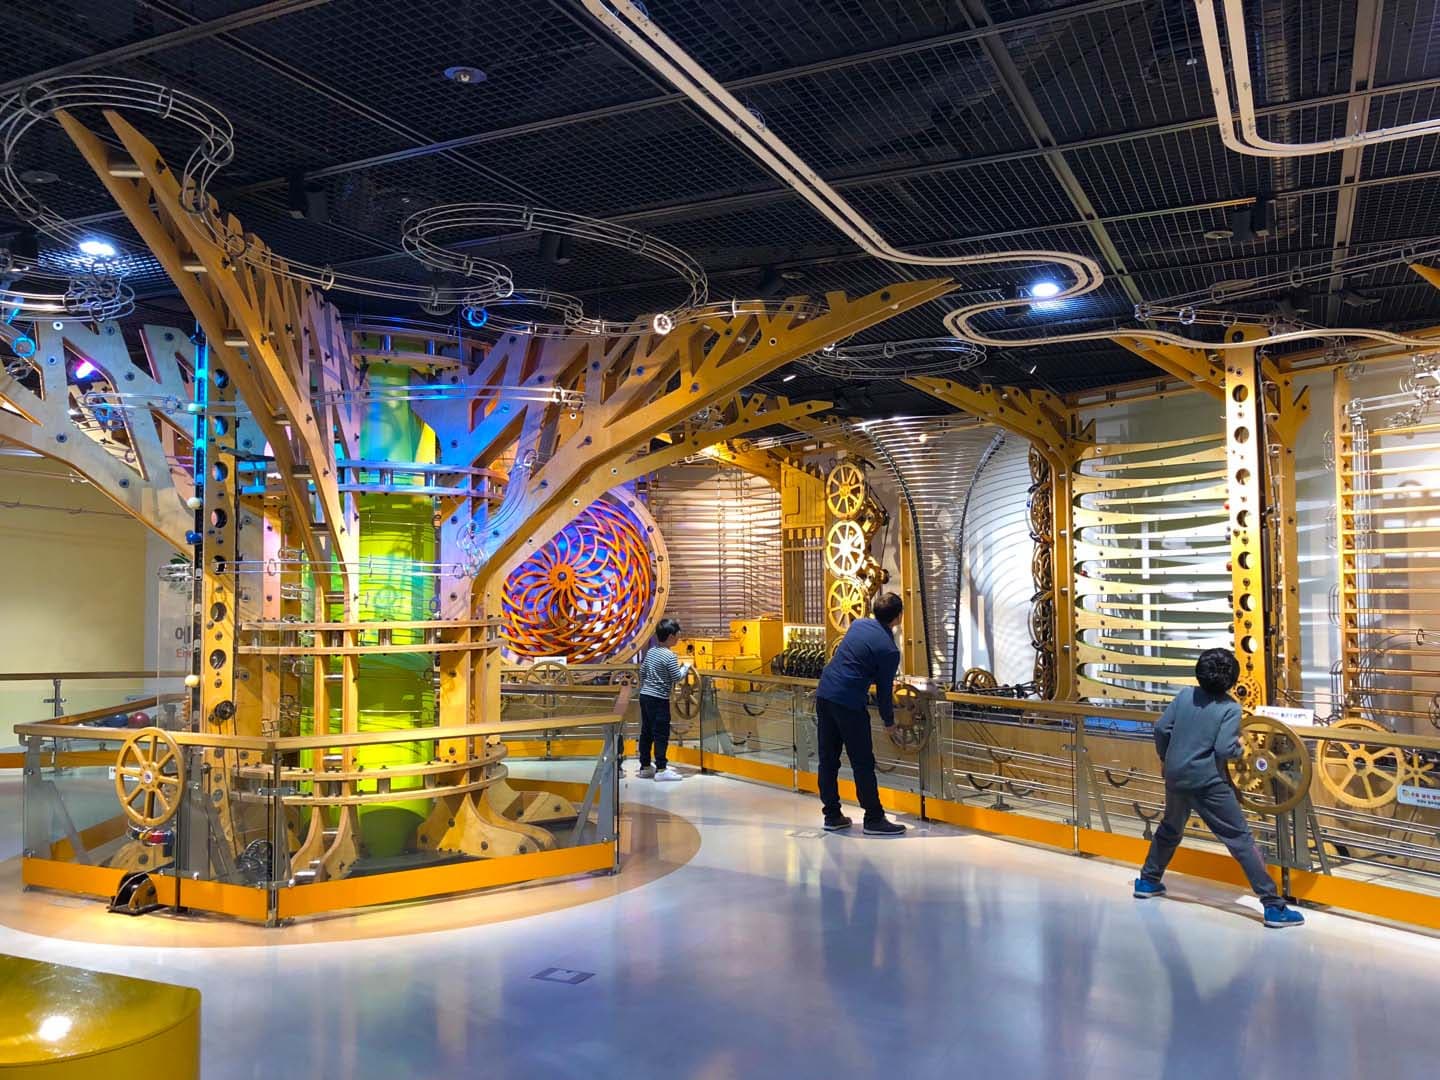 National Children’s Science Center6 : A view of the interior of the National Children's Science Museum, equipped with the latest exhibition space